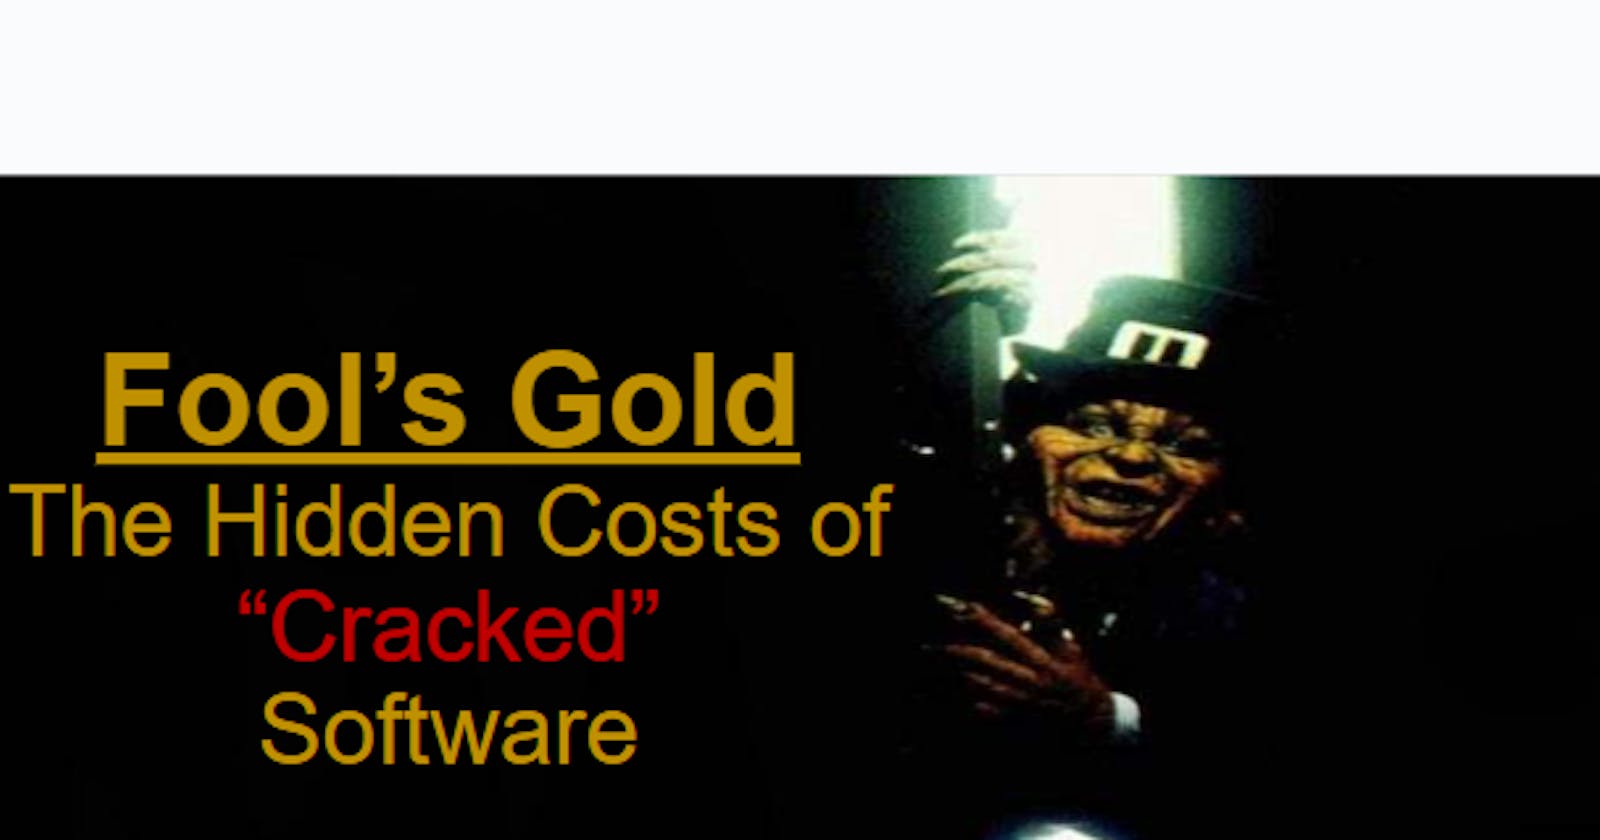 Fools Gold: The Hidden Cost of "Cracked" Software (Part 1)